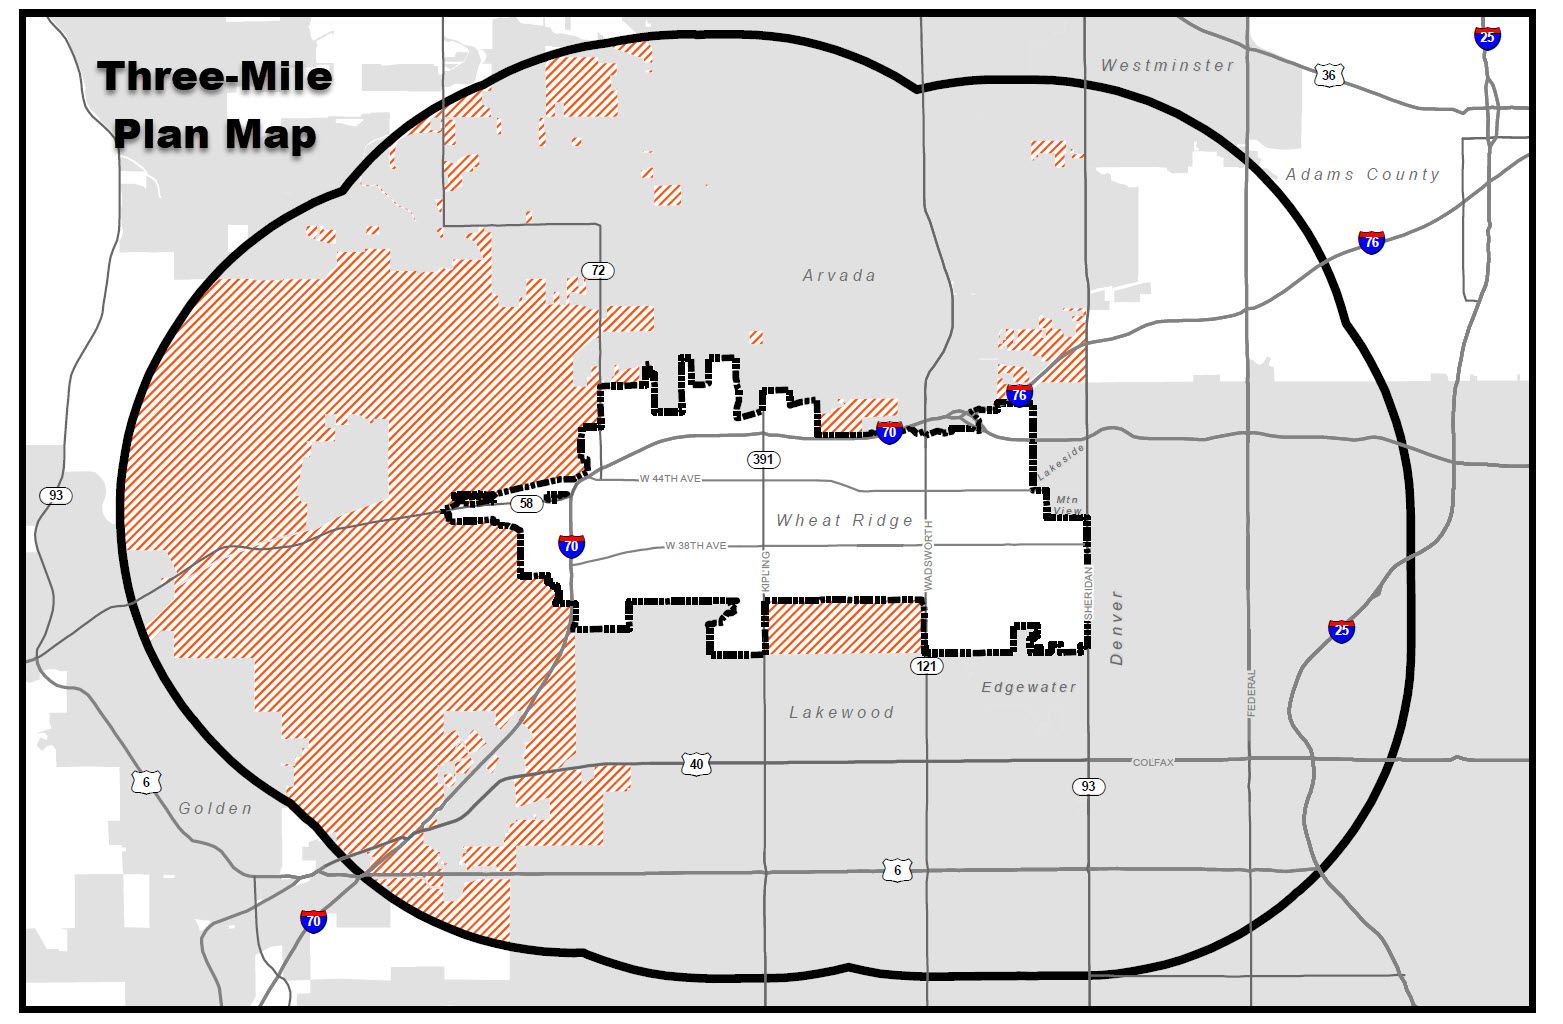 An image of the 3-mile plan map, showing the Wheat Ridge boundary and surrounding areas within 3 …